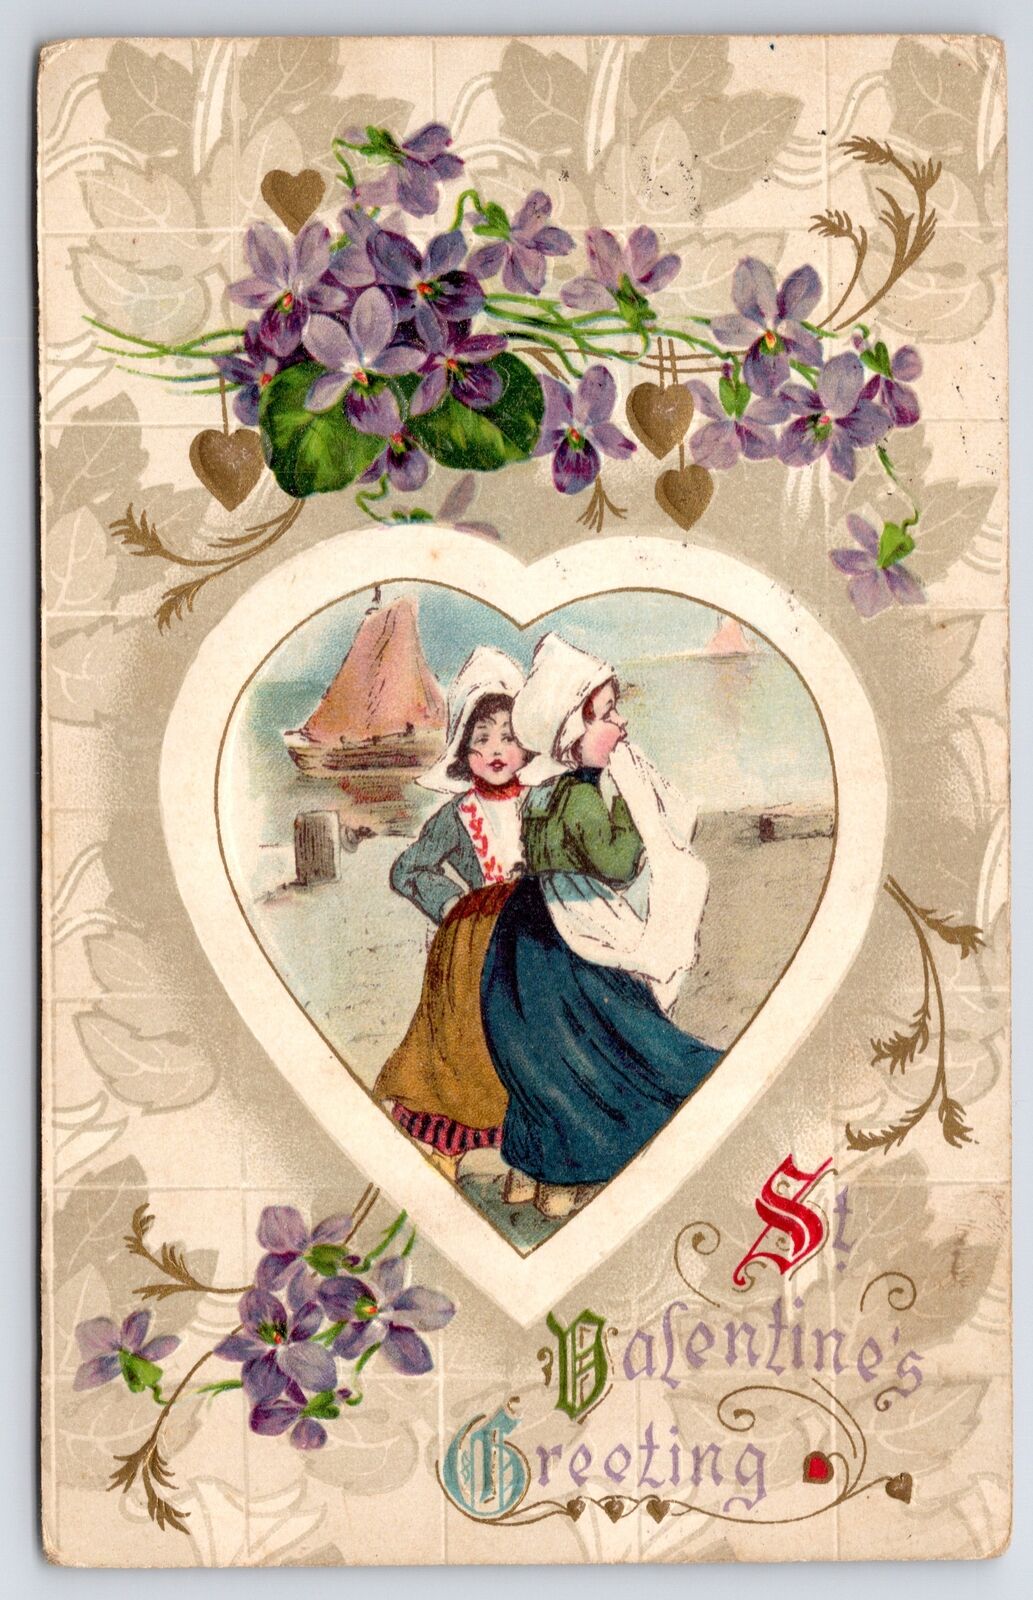 Holiday~Valentines Greeting~Dutch Girls In Heart Inset~Boat~Winsch 1910 Postcard